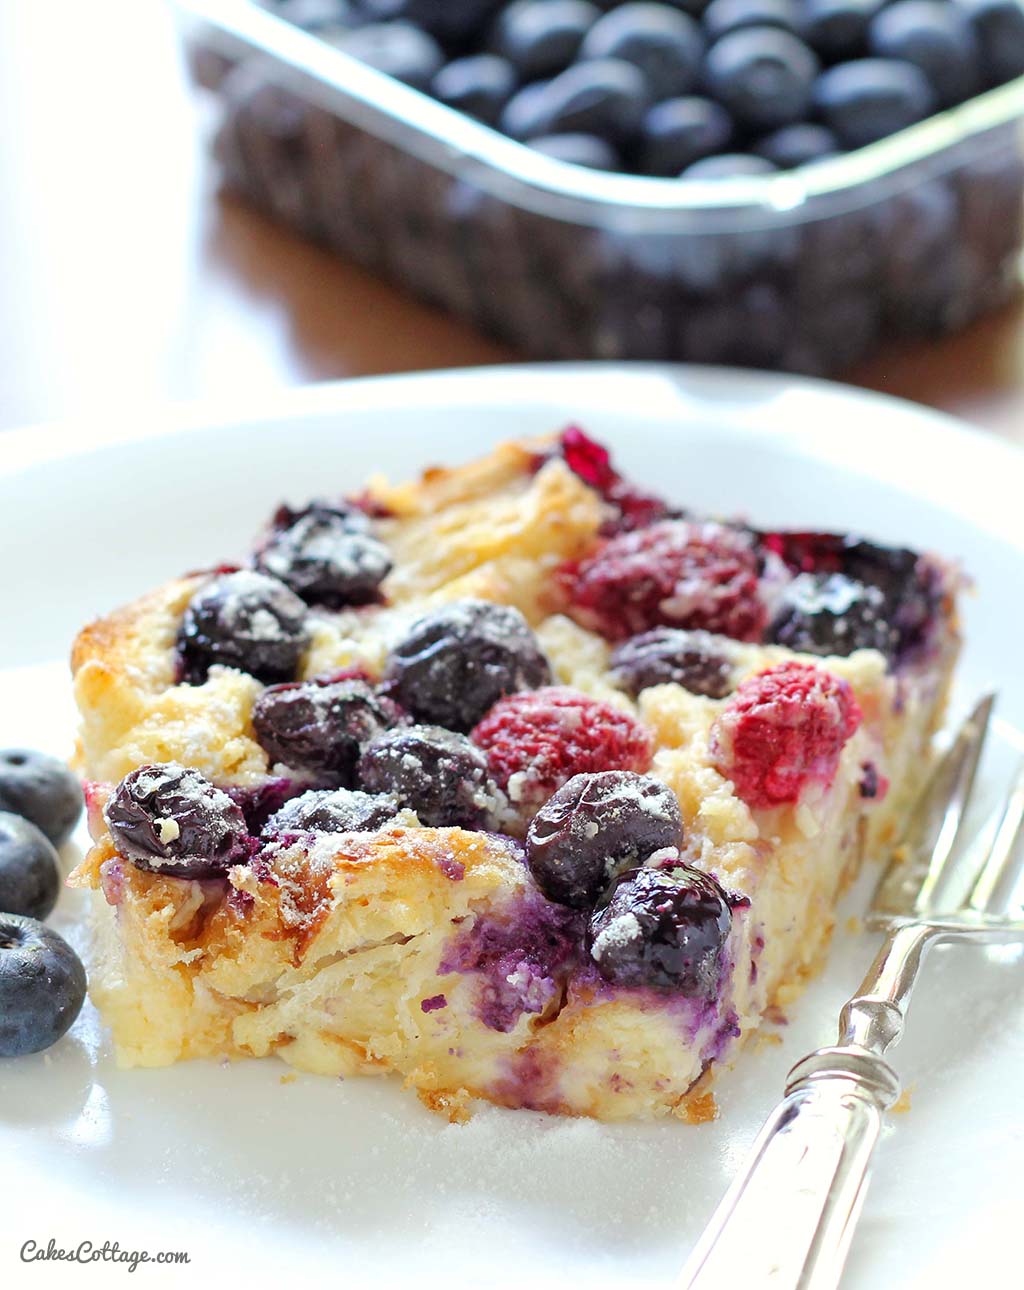 If you love Croissants, you'll love Blueberry Croissant Bake. If you love blueberries and raspberries, you'll love this too.